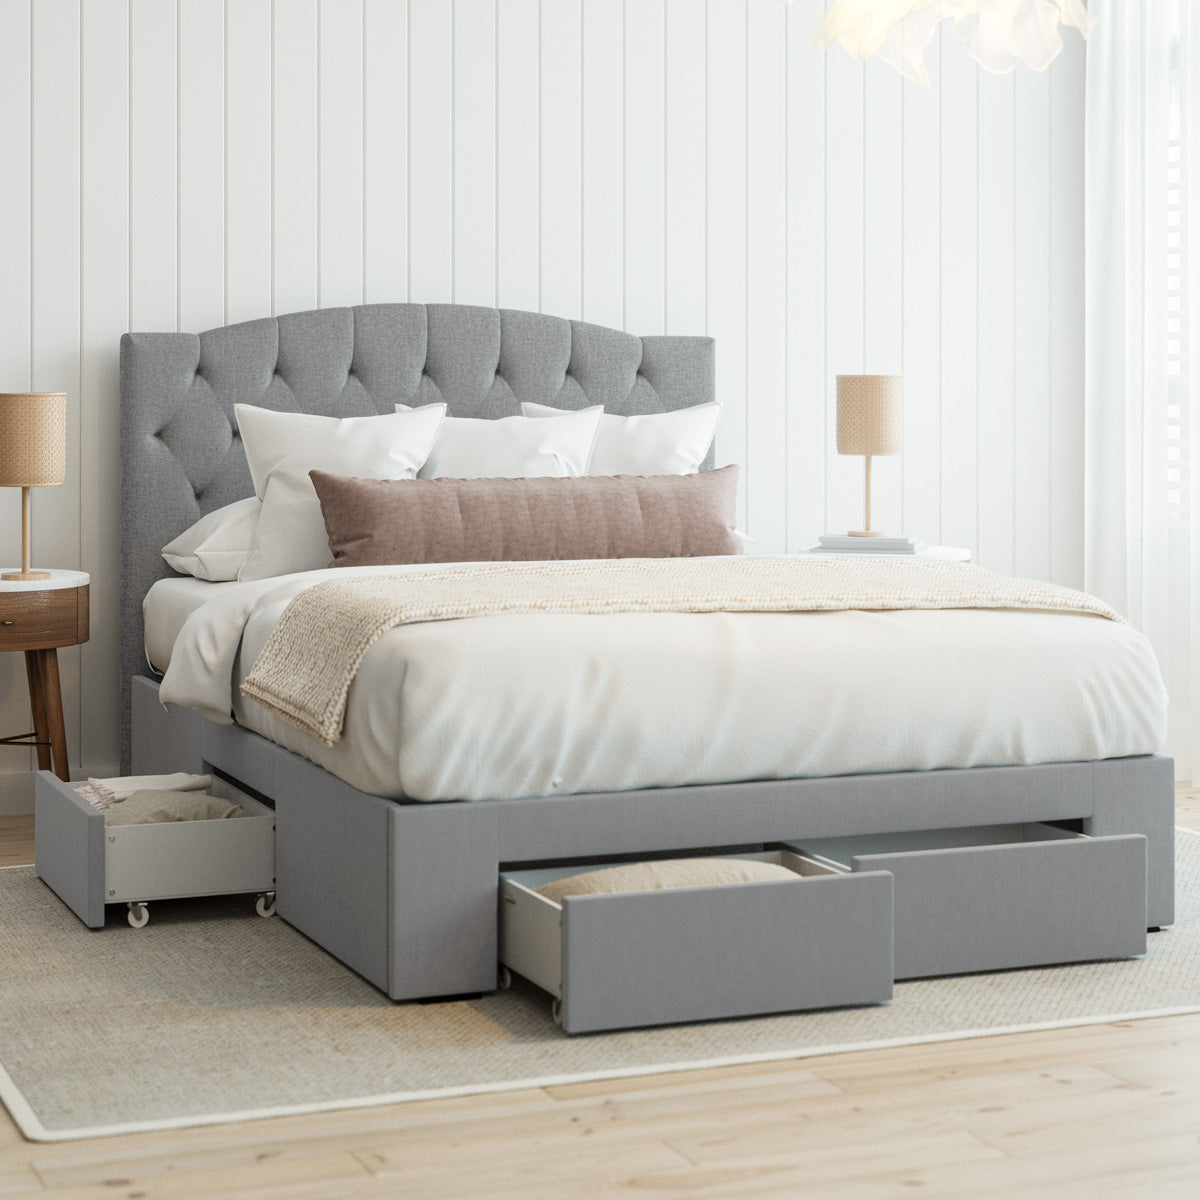 Charlotte Curved Bed Frame with Four Storage Drawers (Grey Fabric)